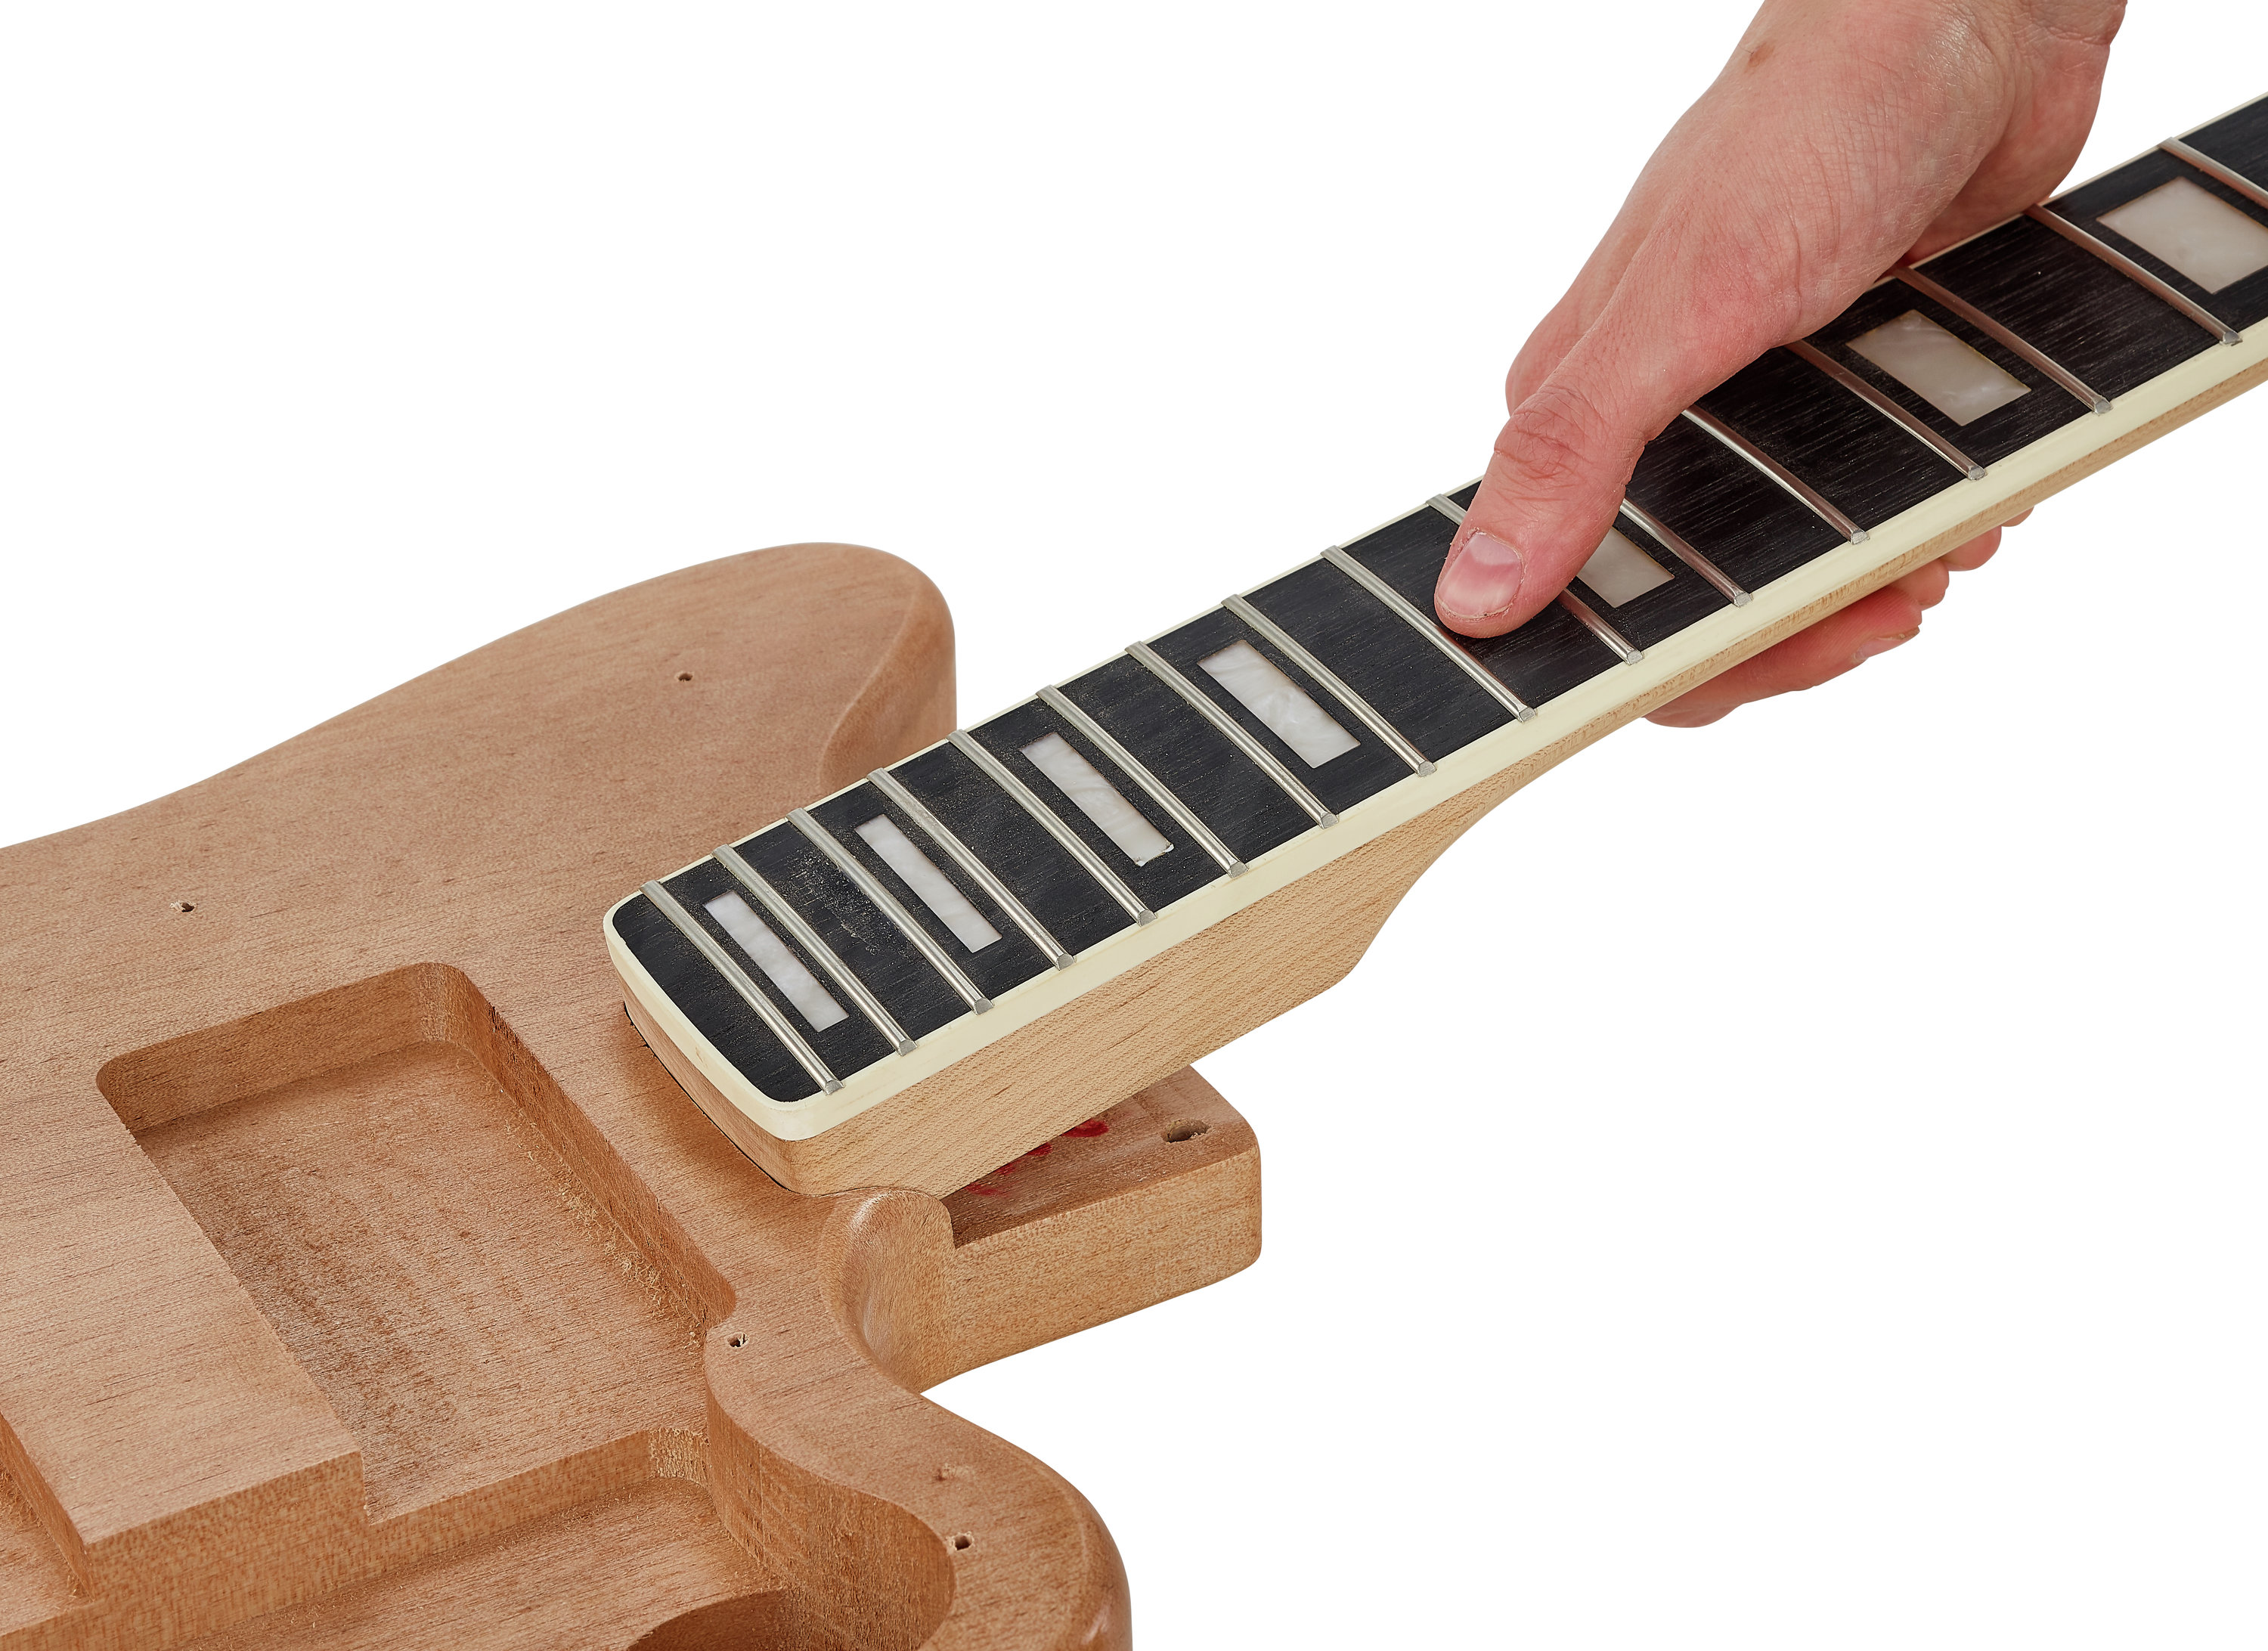 Harley Benton releases carve-your-own guitar kit